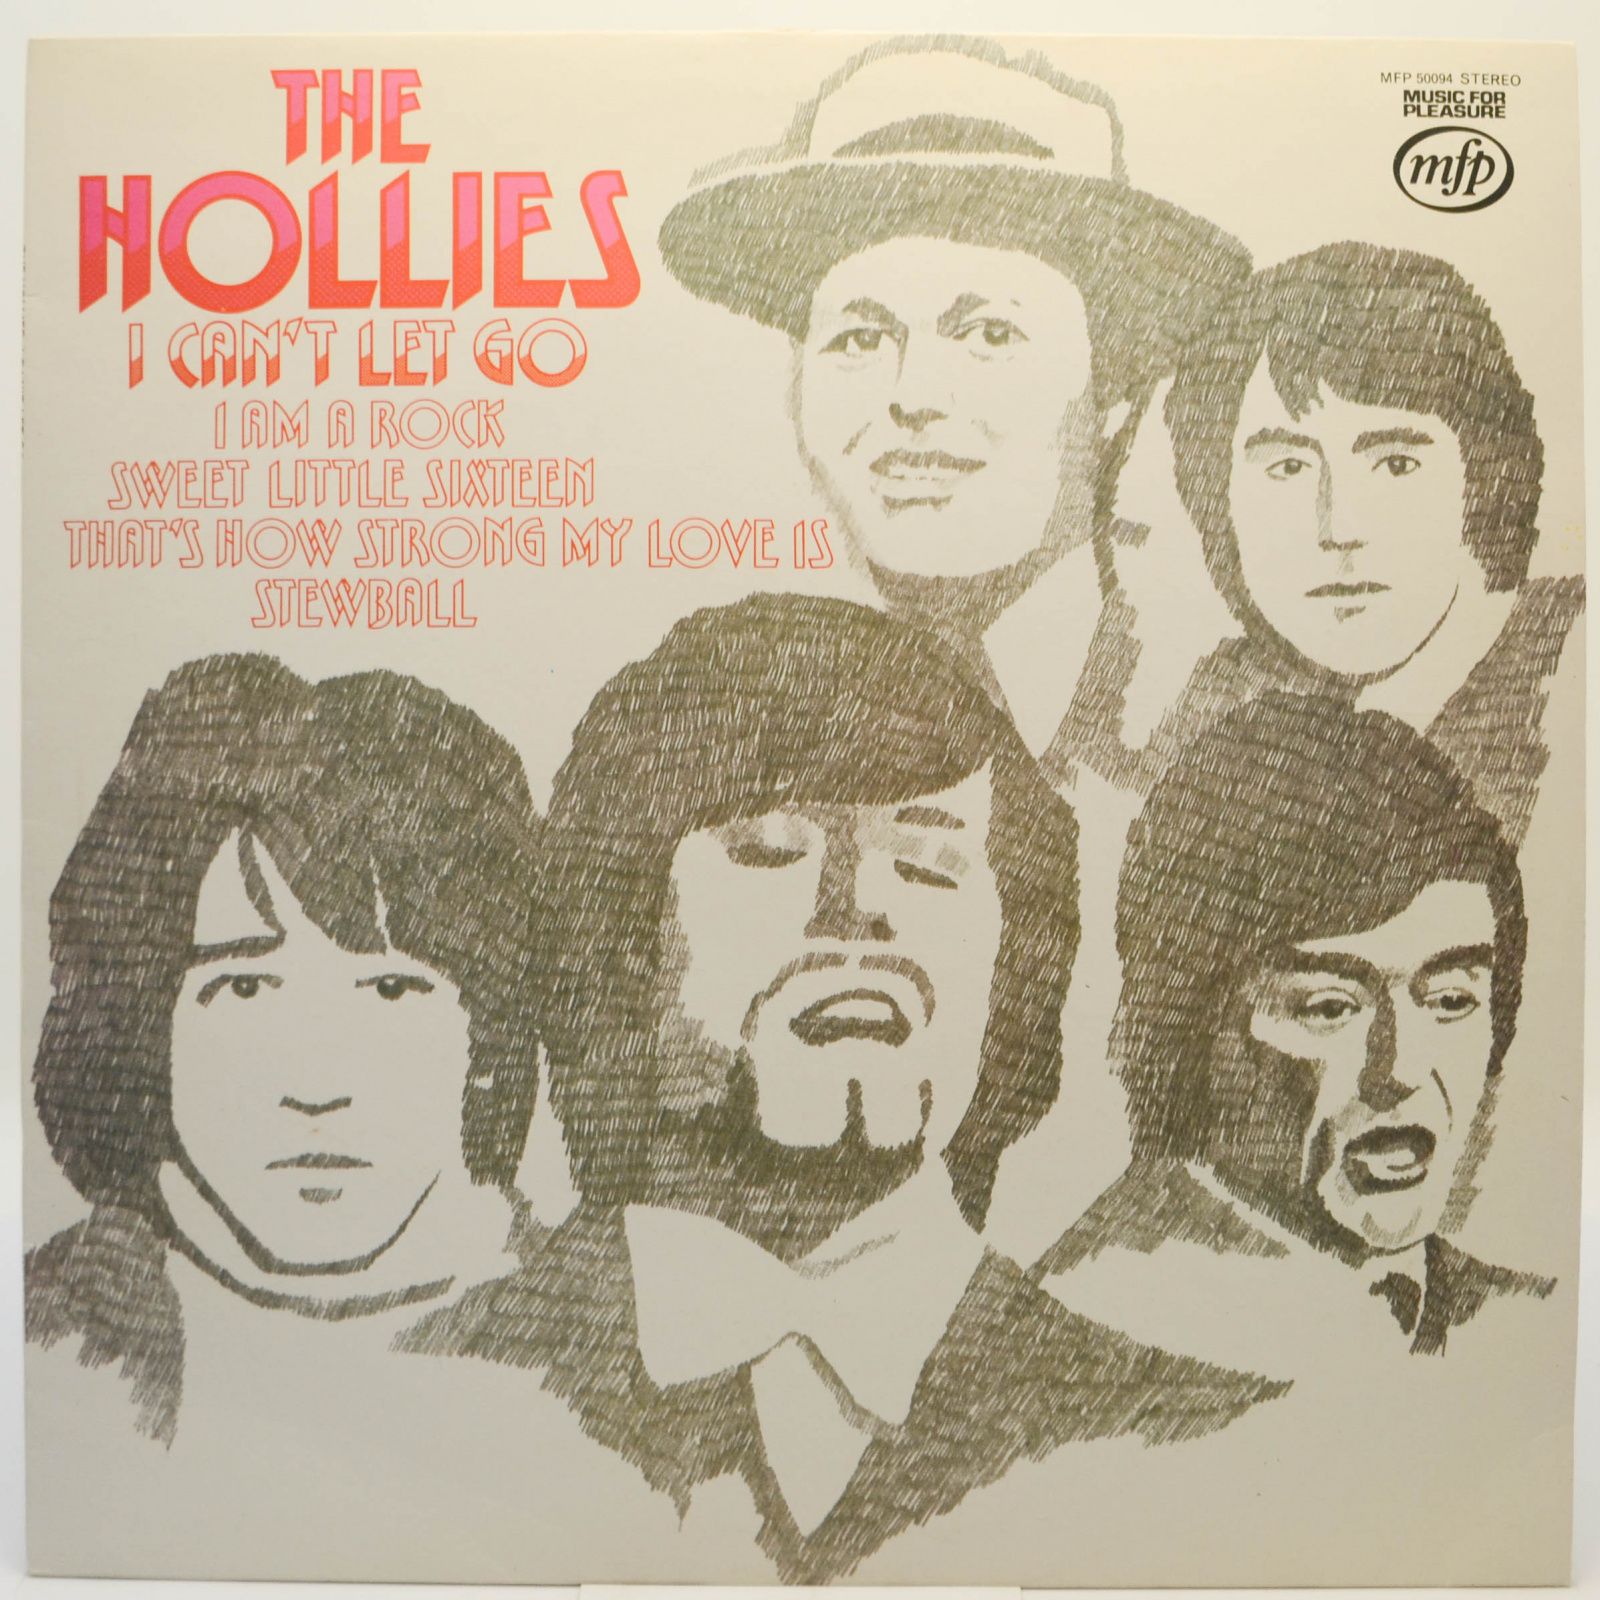 Hollies — I Can't Let Go (UK), 1974